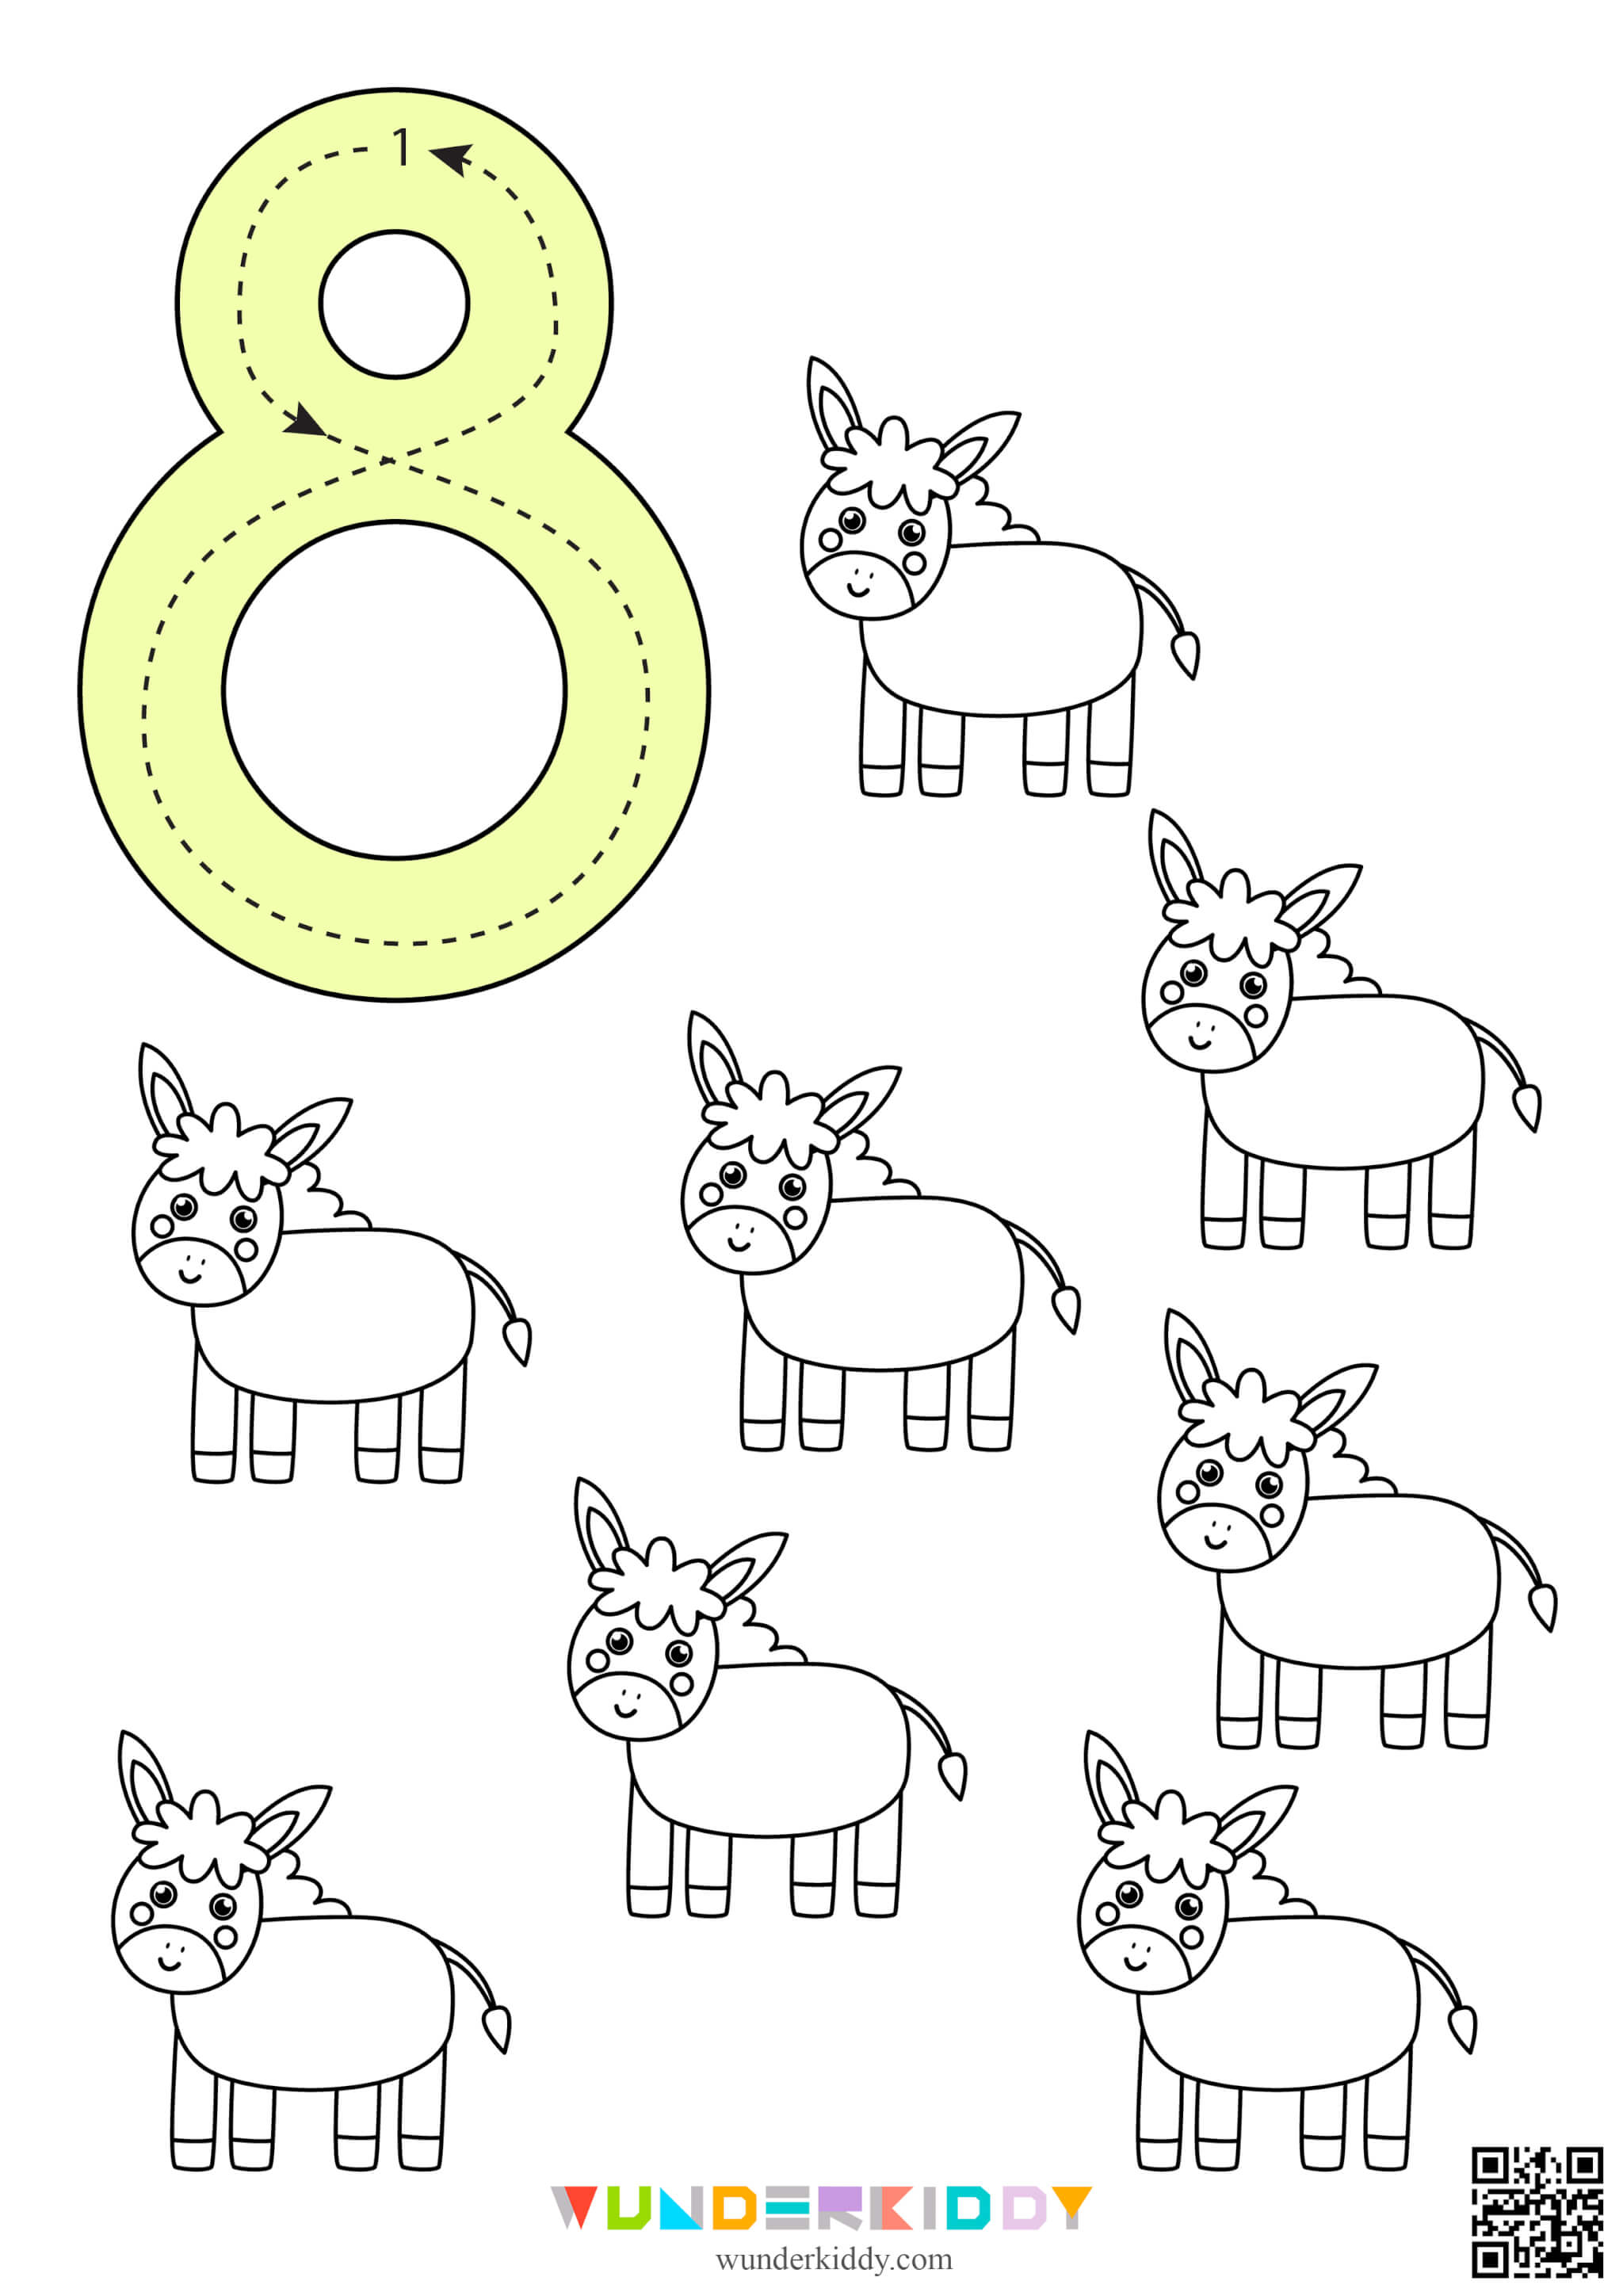 Worksheets «Count and color» - Image 9